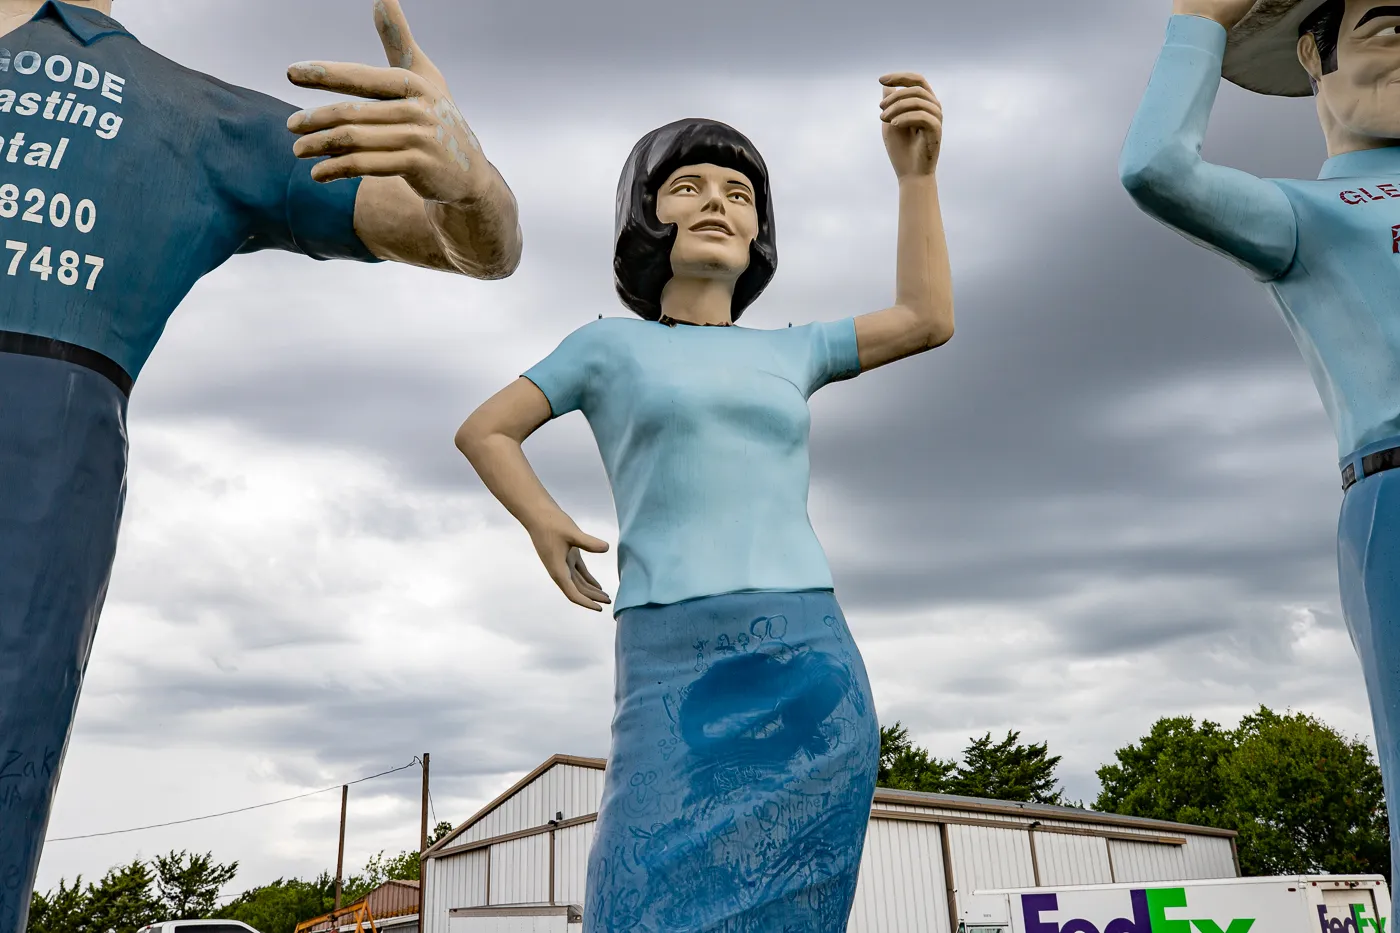 Uniroyal Gal at Glenn Goode's Big People in Gainesville, Texas Roadside Attraction